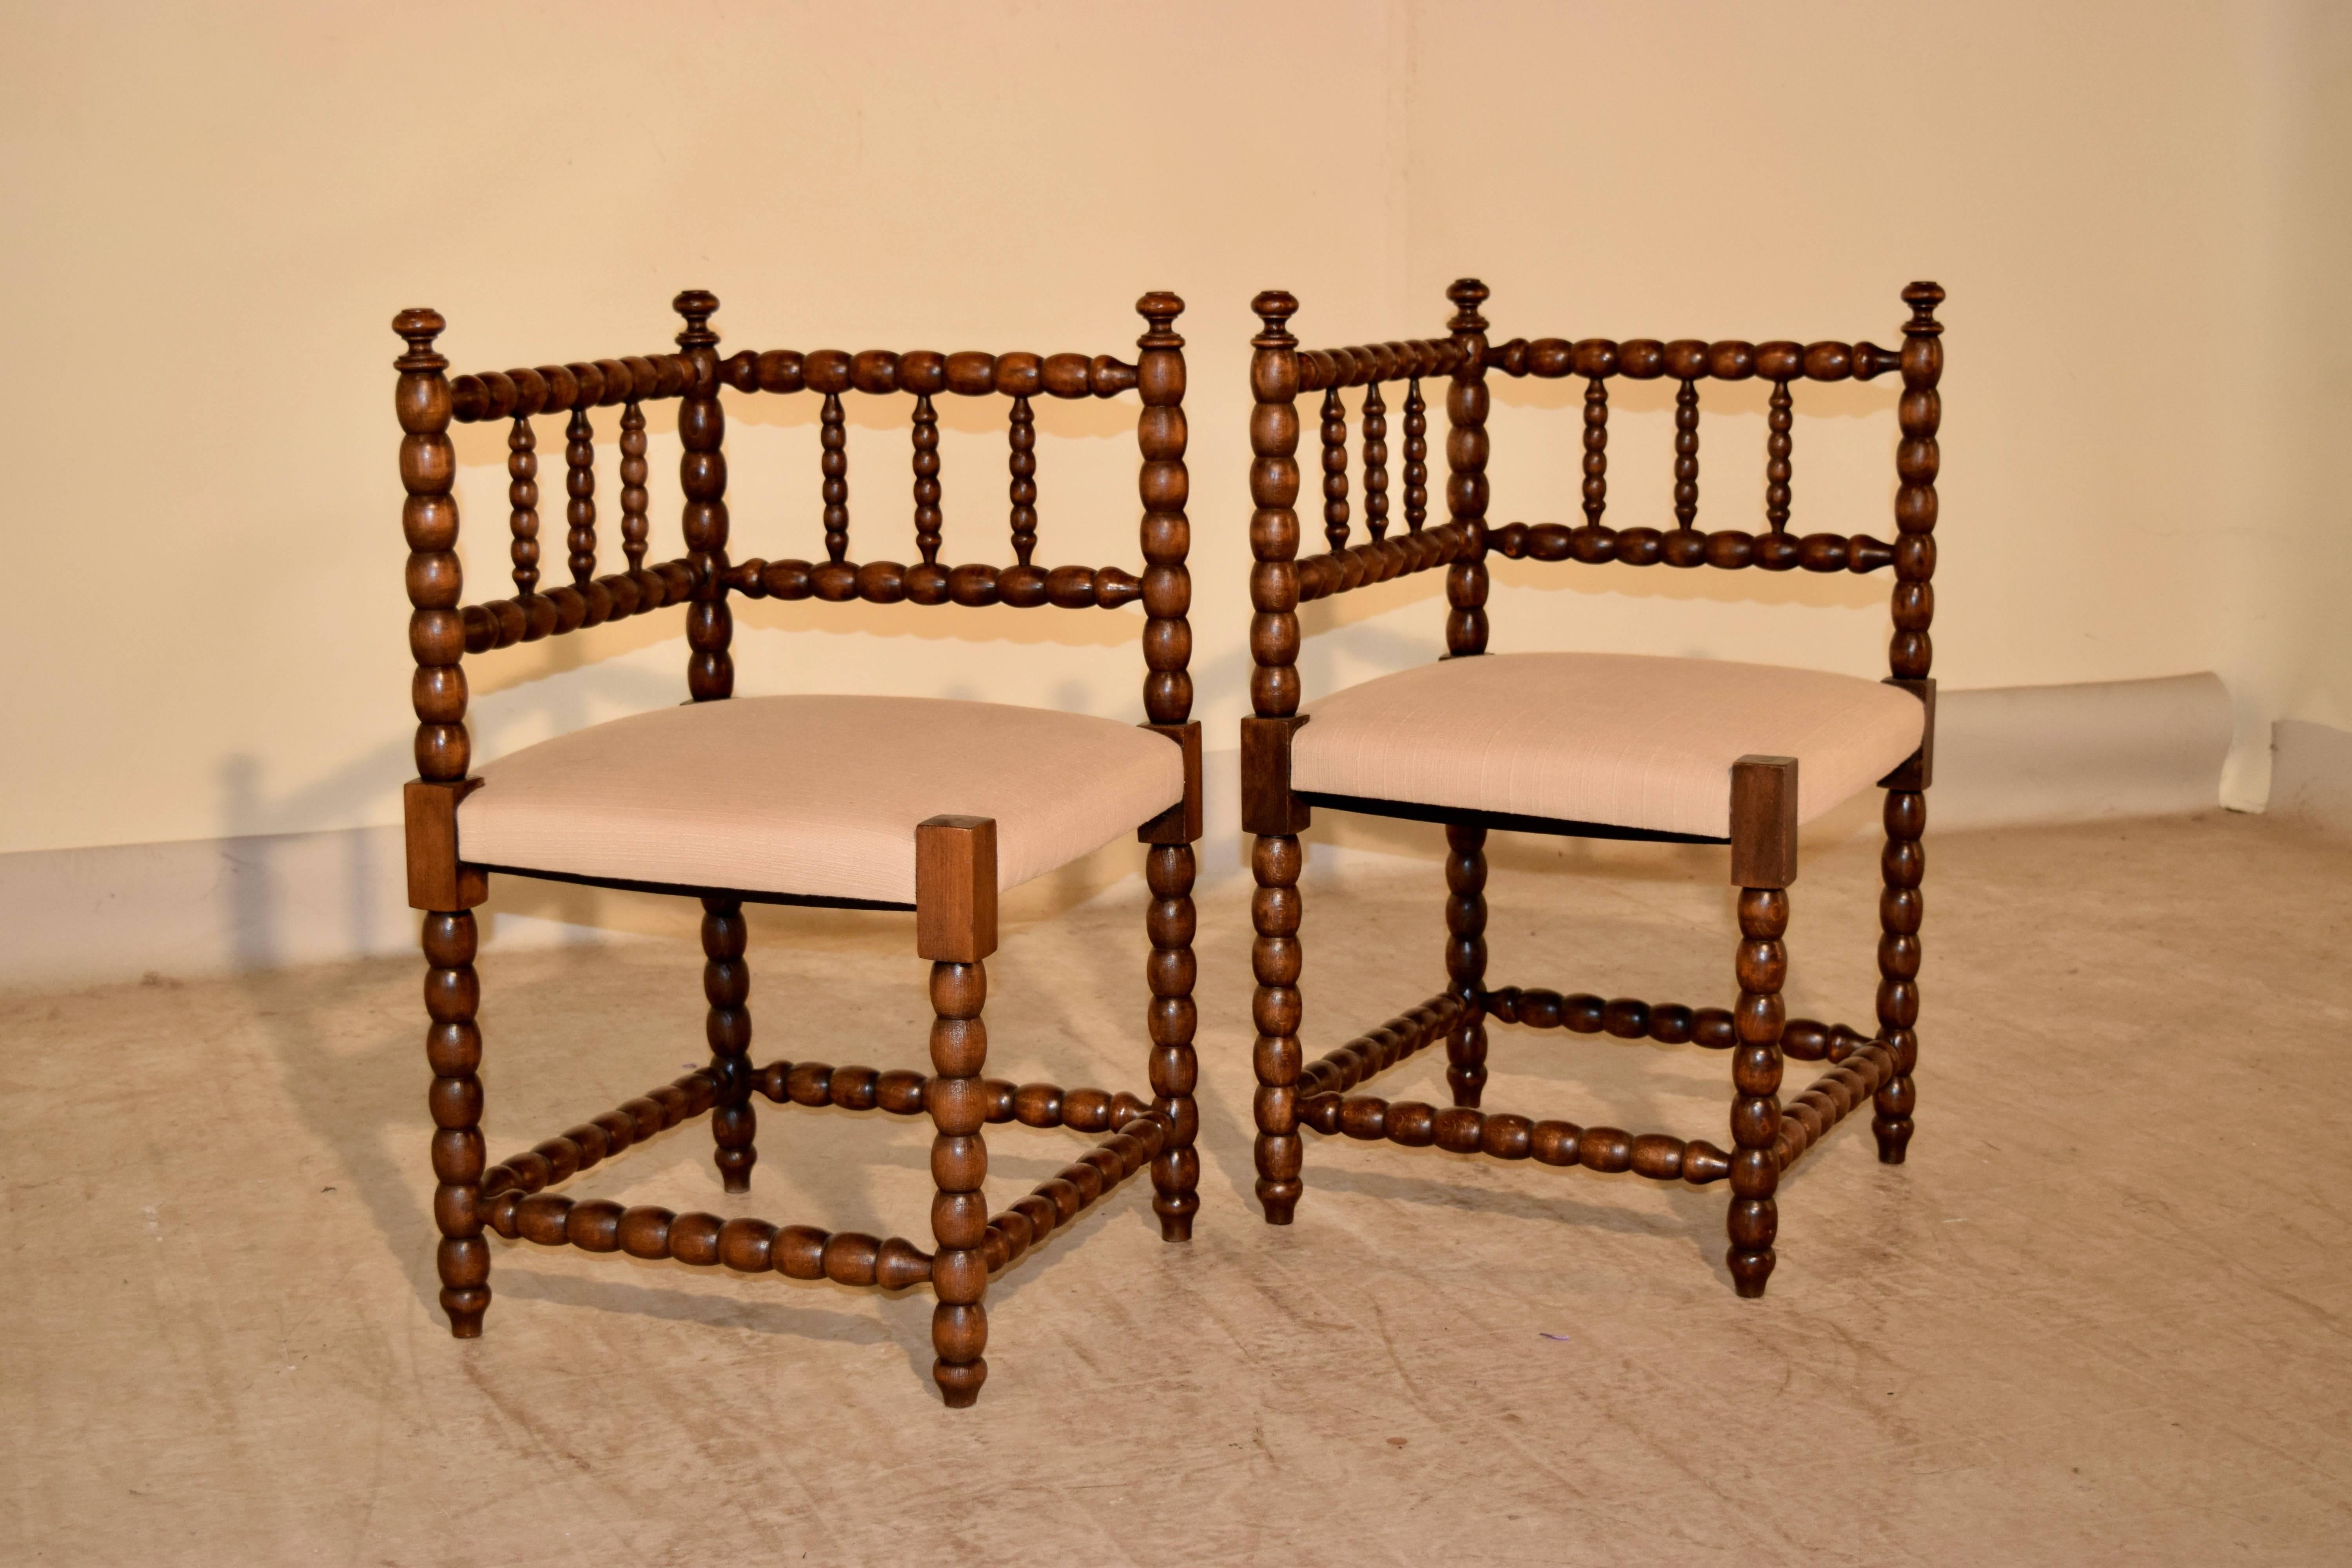 Pair of 19th-century French corner chairs made from oak. The frames are hand-turned in a spool design and the seats have been newly upholstered in linen.
  